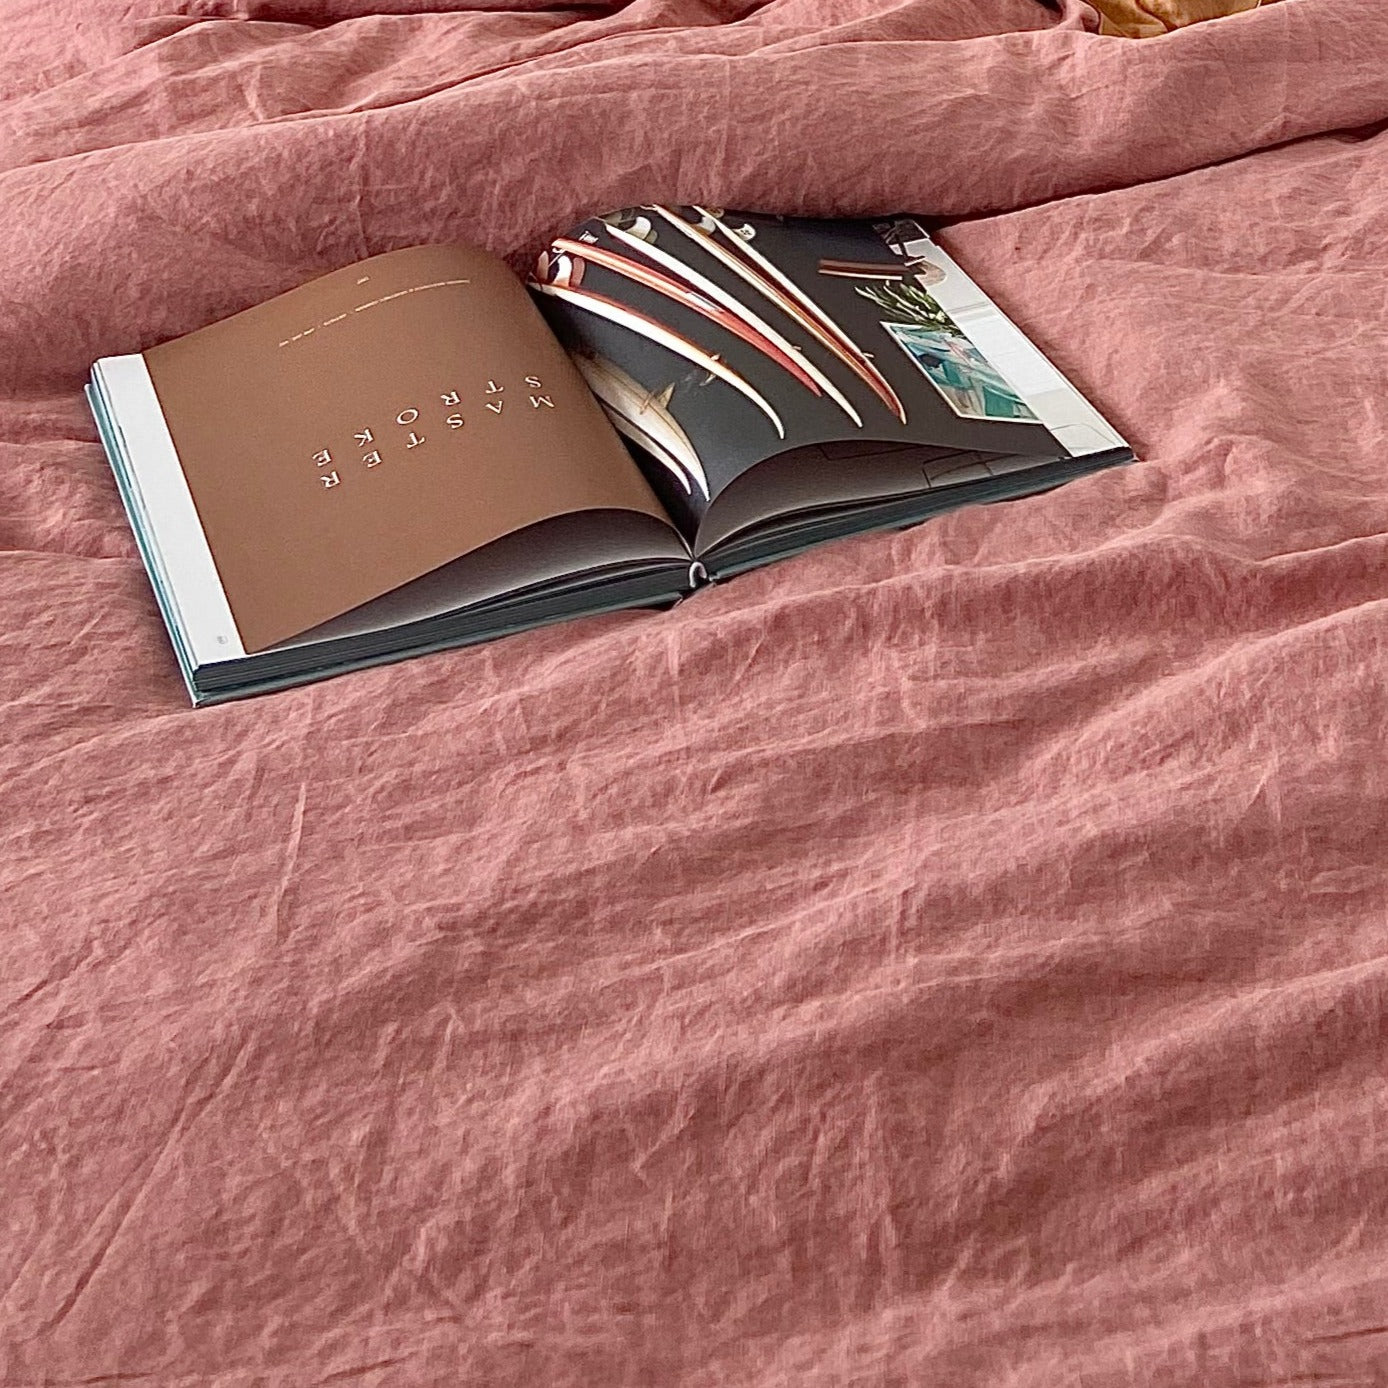 Dusty Pink French Flax Linen Sheet Set